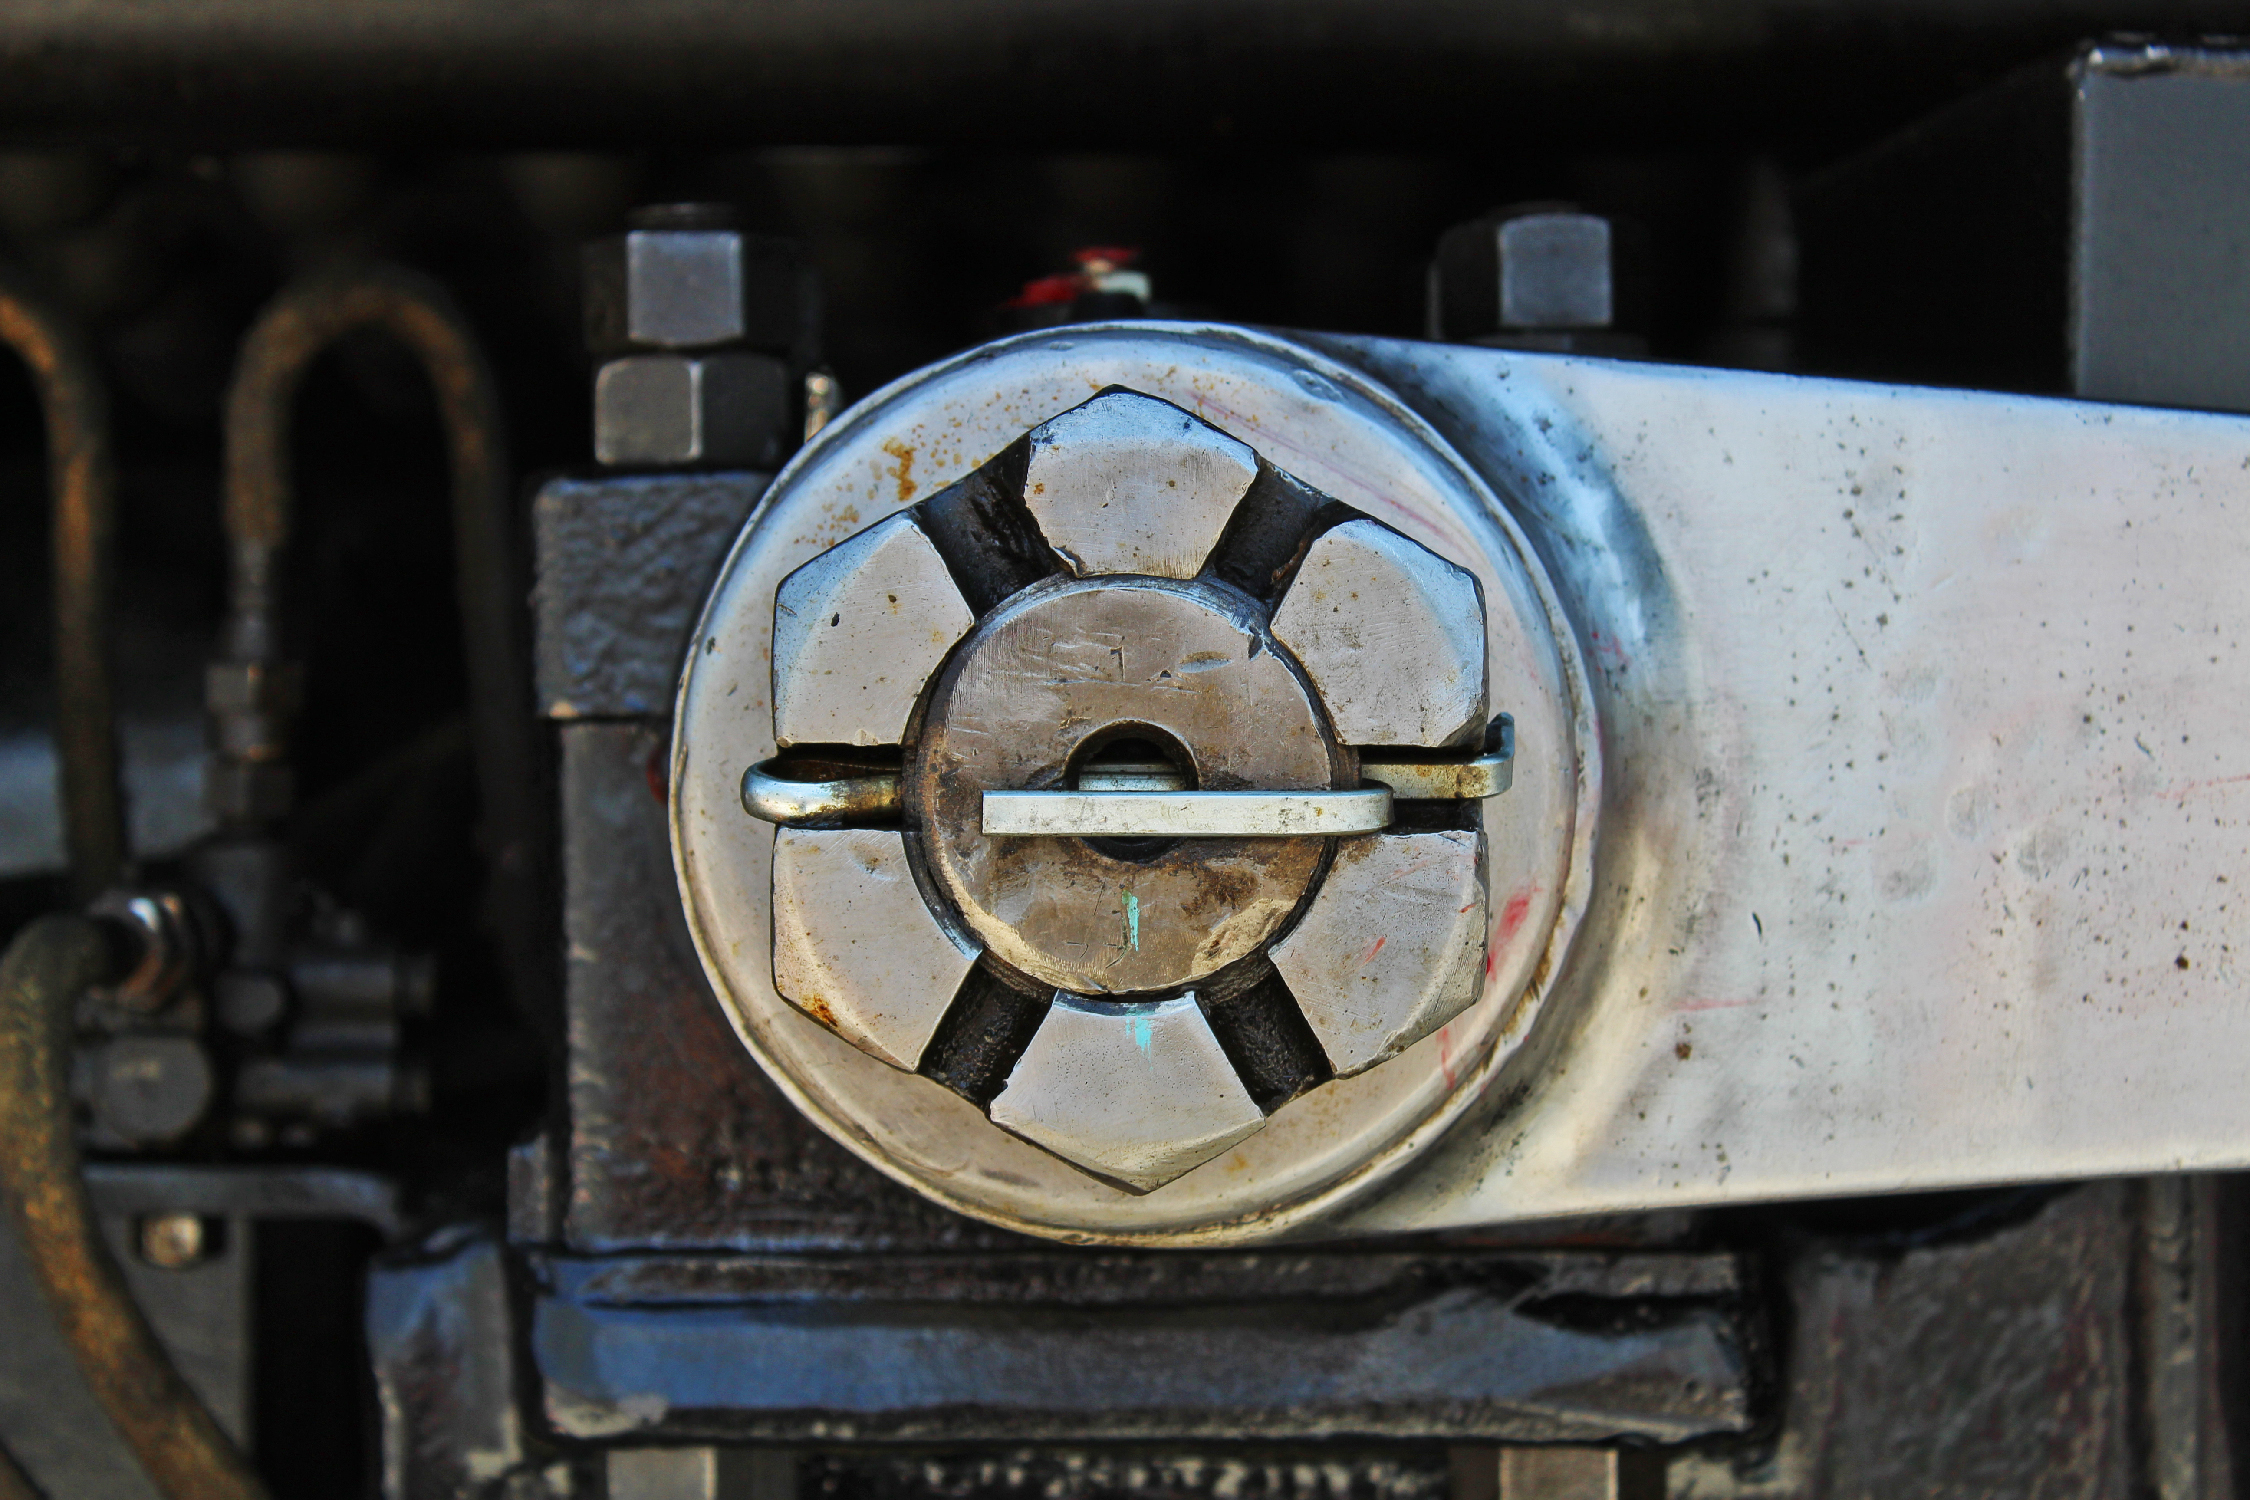 Close-up of a large nut holding together part of a Big Boy locomotive.